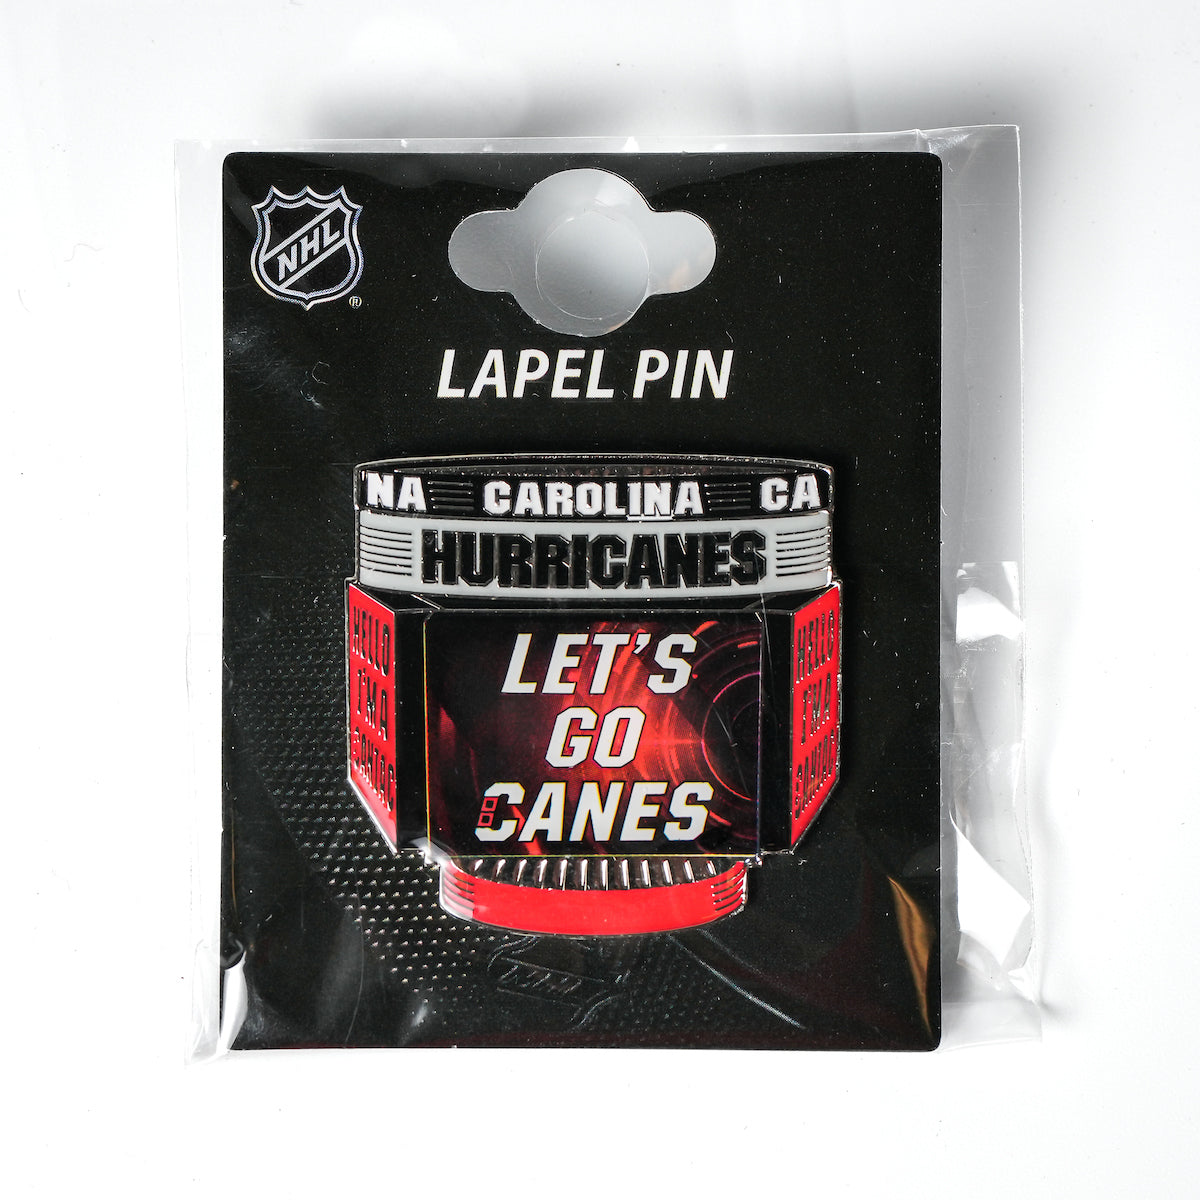 Pin designed like jumbotron that says Let's Go Canes